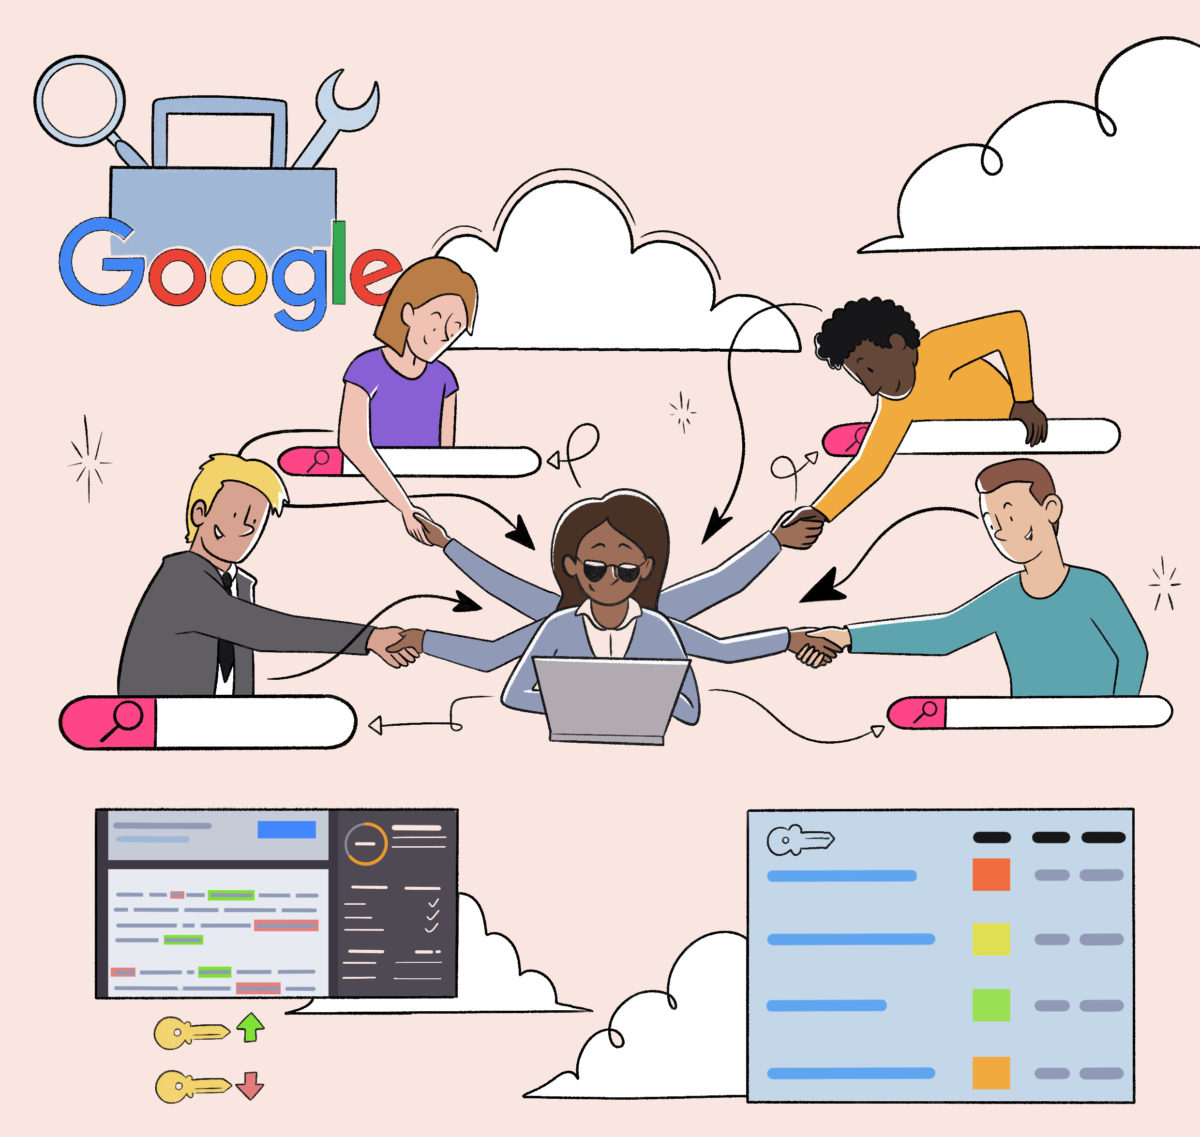 Illustration of a diverse group of people collaborating online using cloud technology and google services.